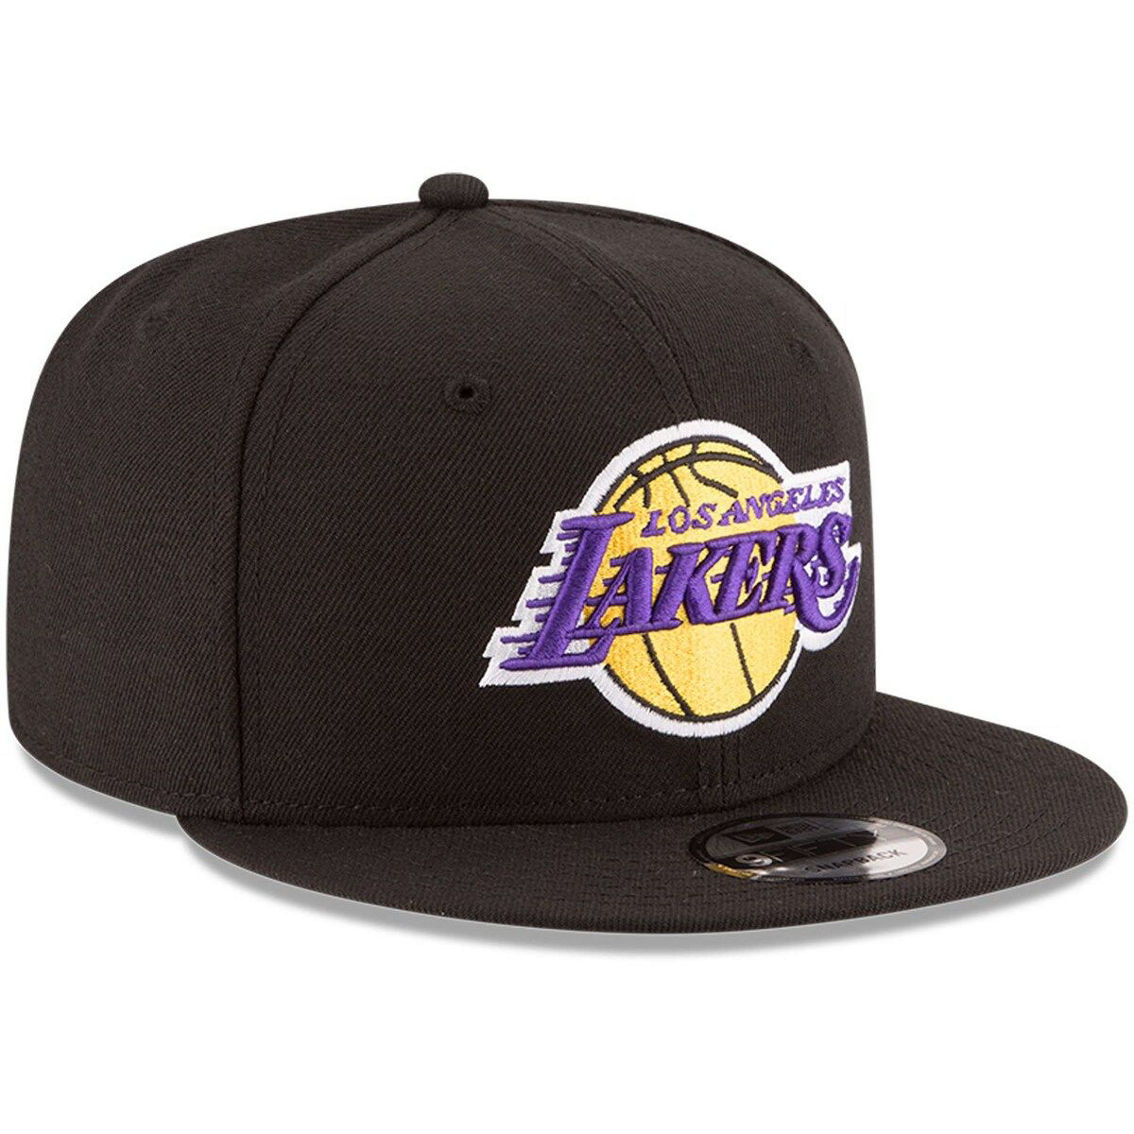 New Era Men's Black Los Angeles Lakers Official Team Color 9FIFTY Snapback Hat - Image 4 of 4